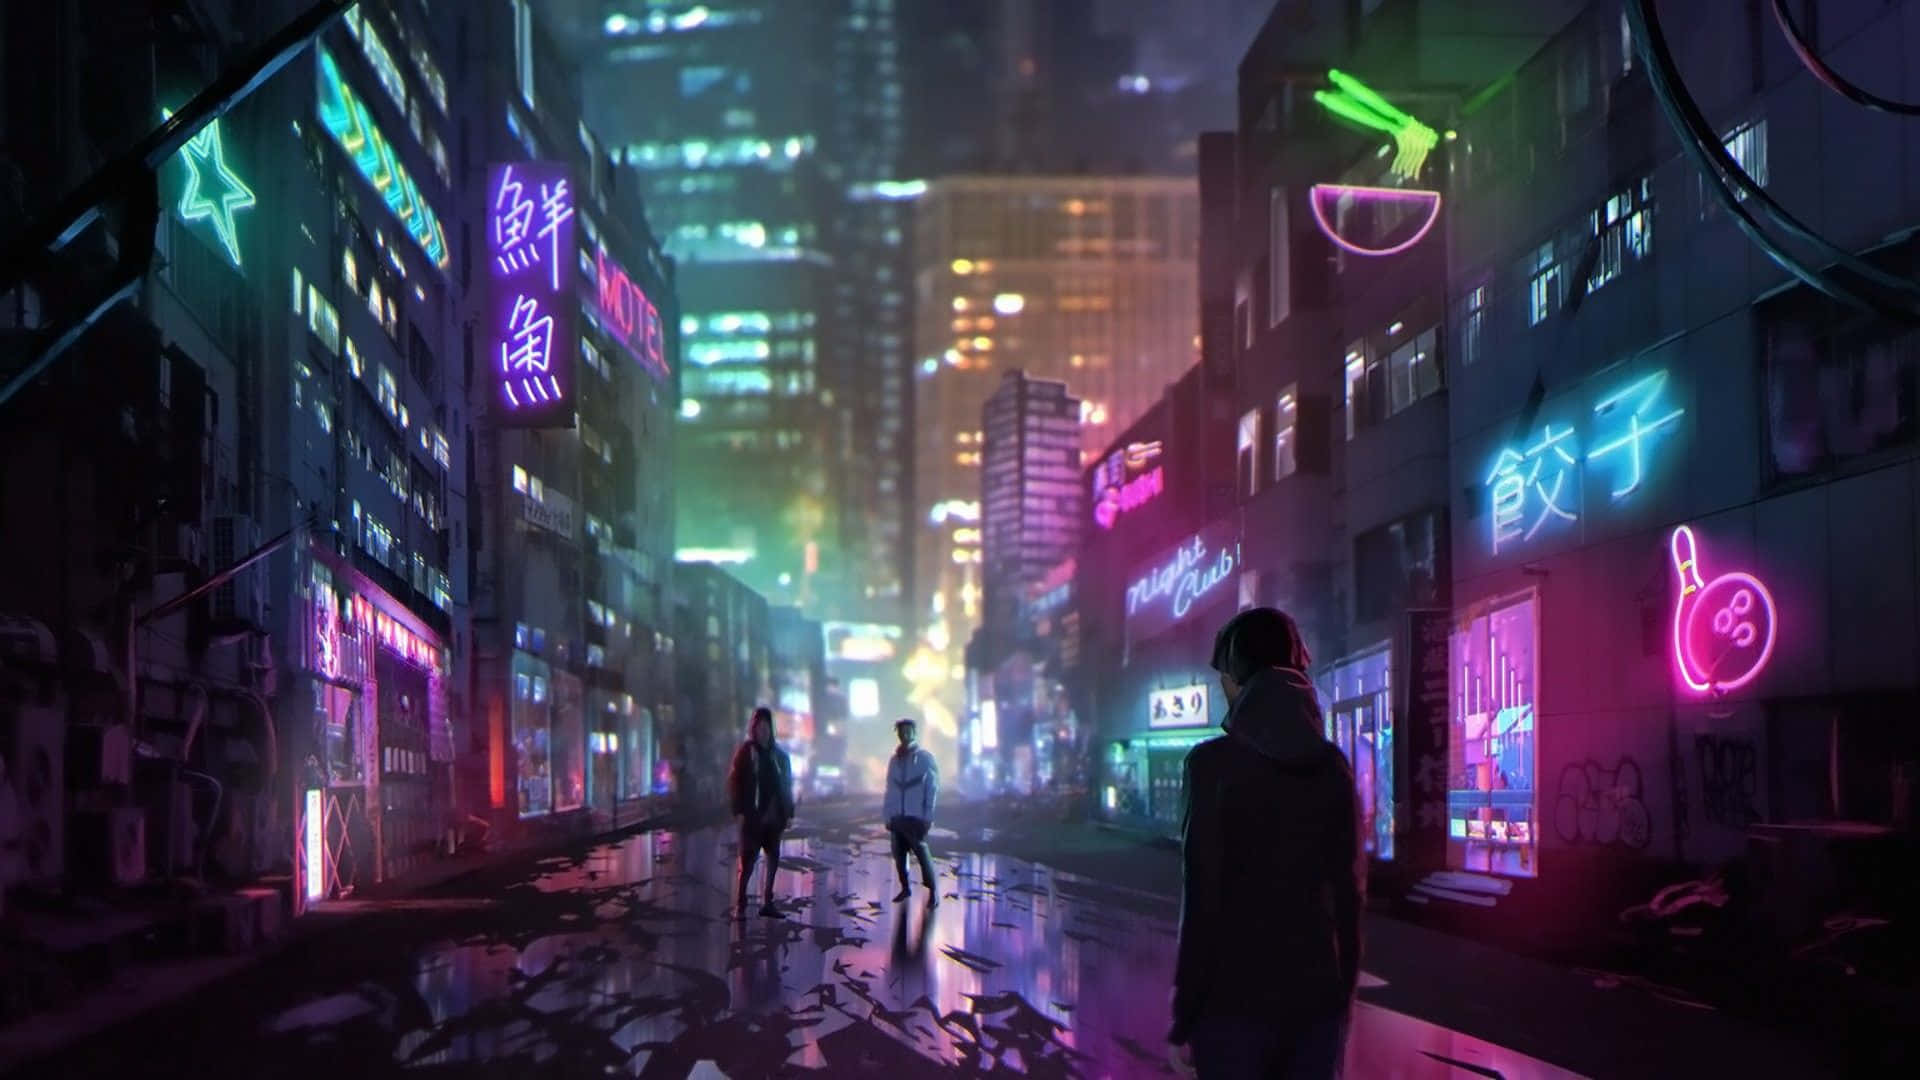 Stay connected in the future with a Cyberpunk-inspired laptop. Wallpaper